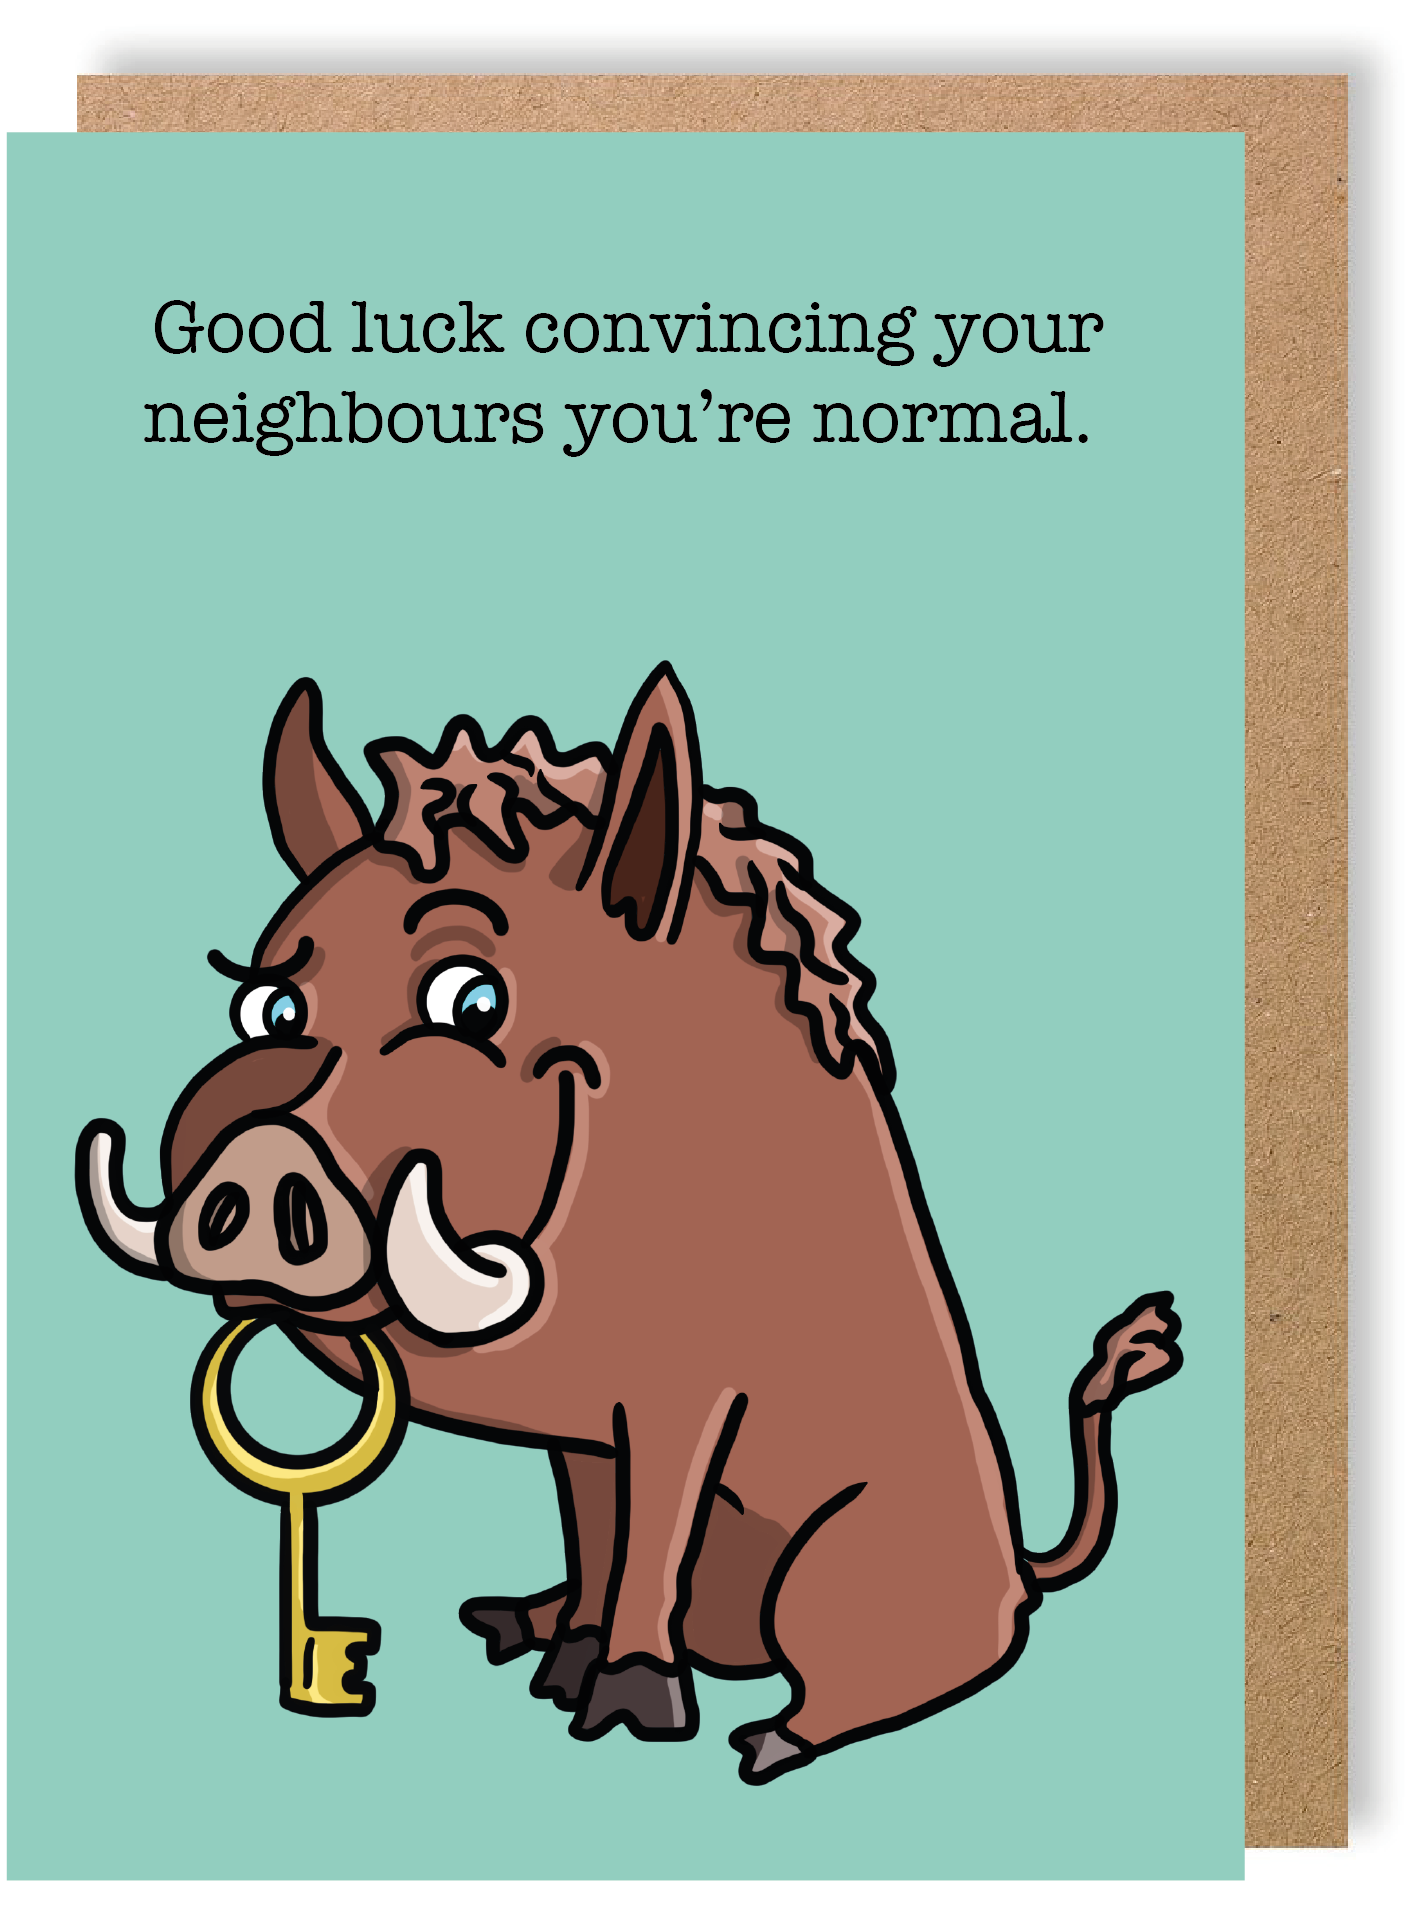 Good Luck Convincing Your Neighbours You're Normal. - Wild Boar - Greetings Card - LukeHorton Art